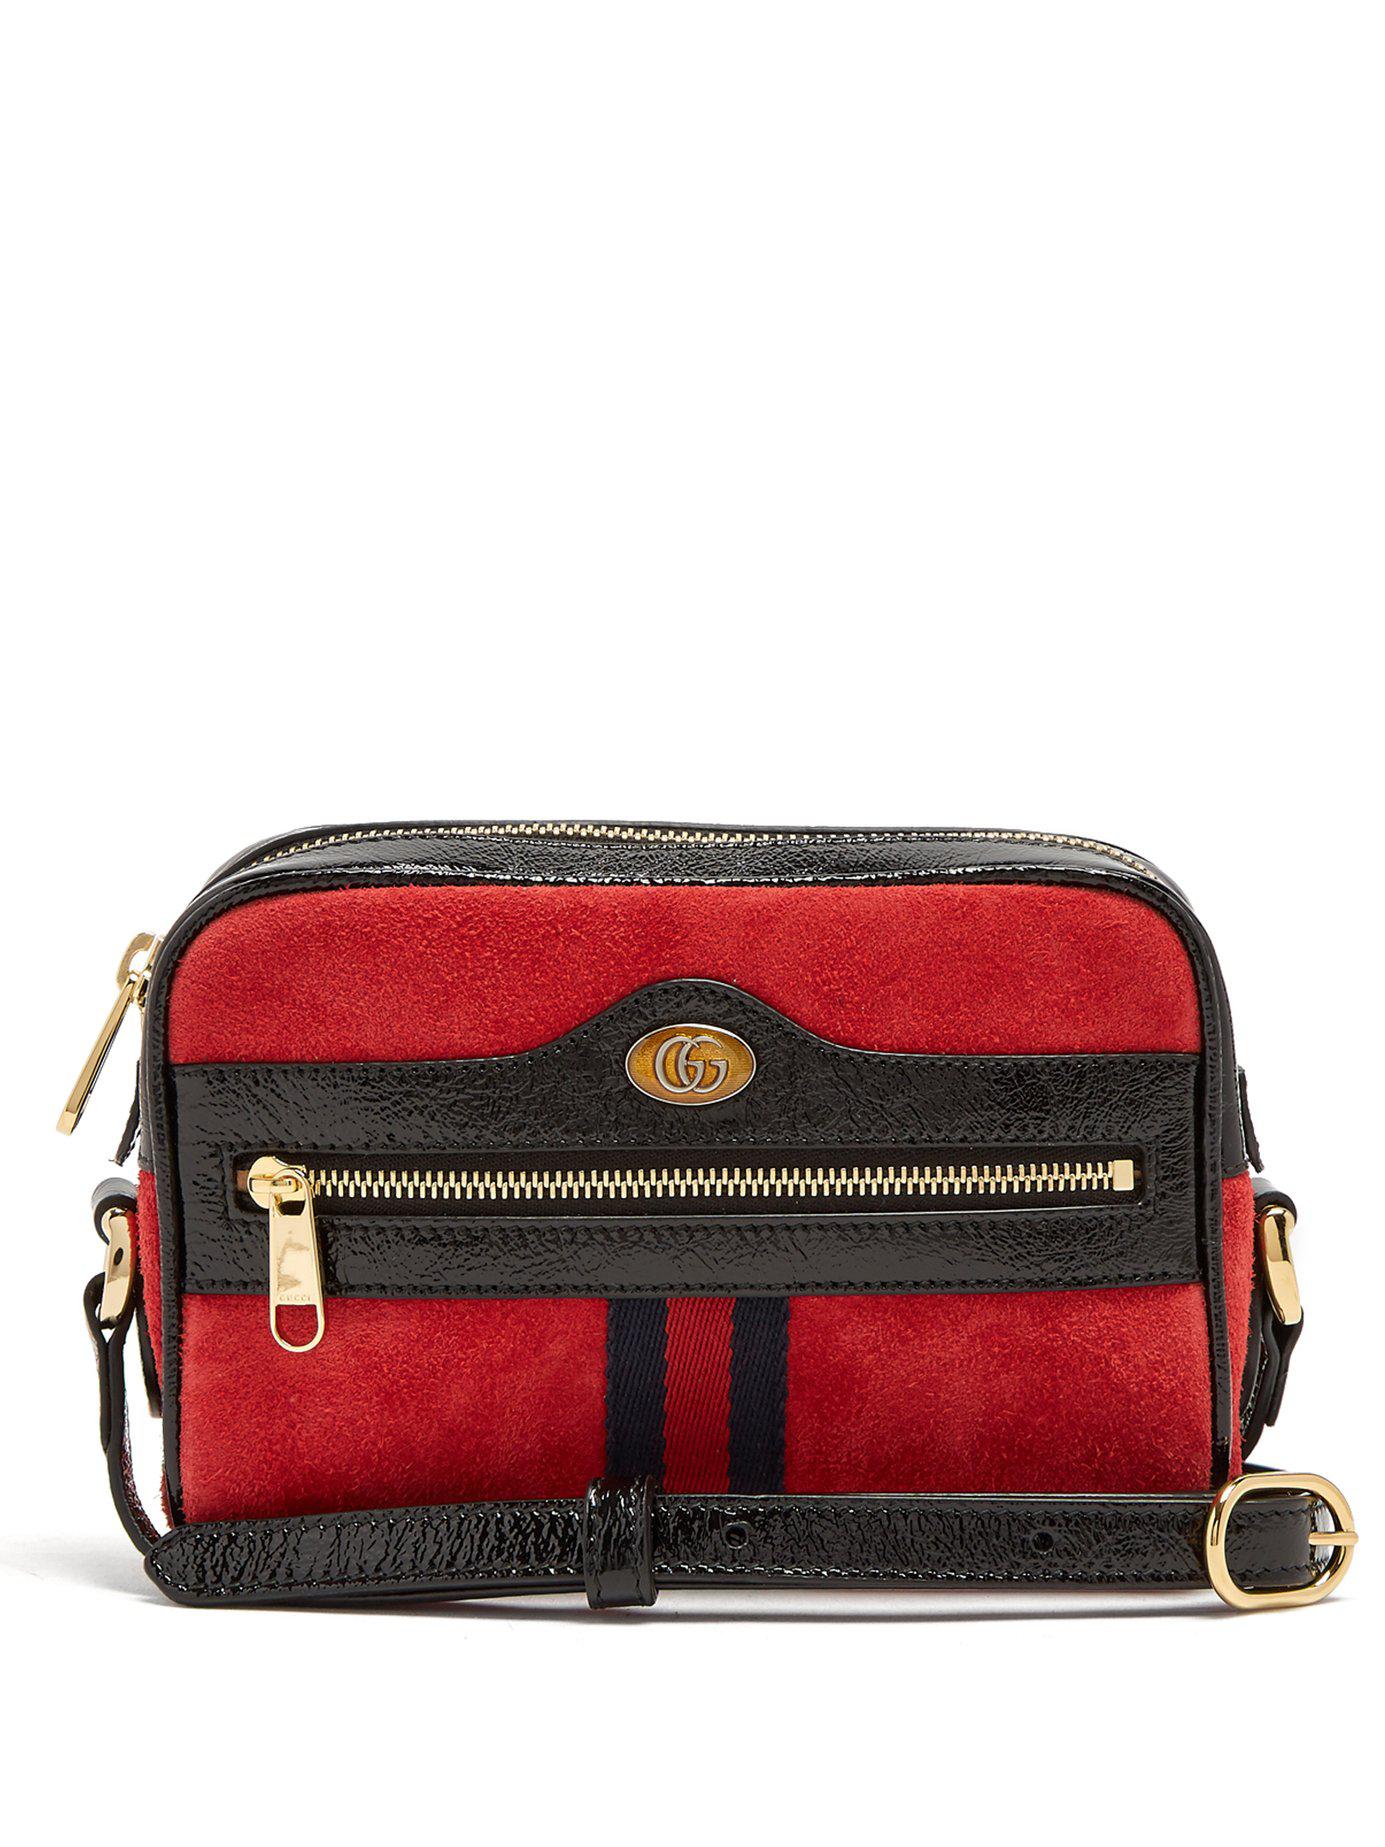 Lyst - Gucci Ophidia Mini Suede Cross Body Bag in Red